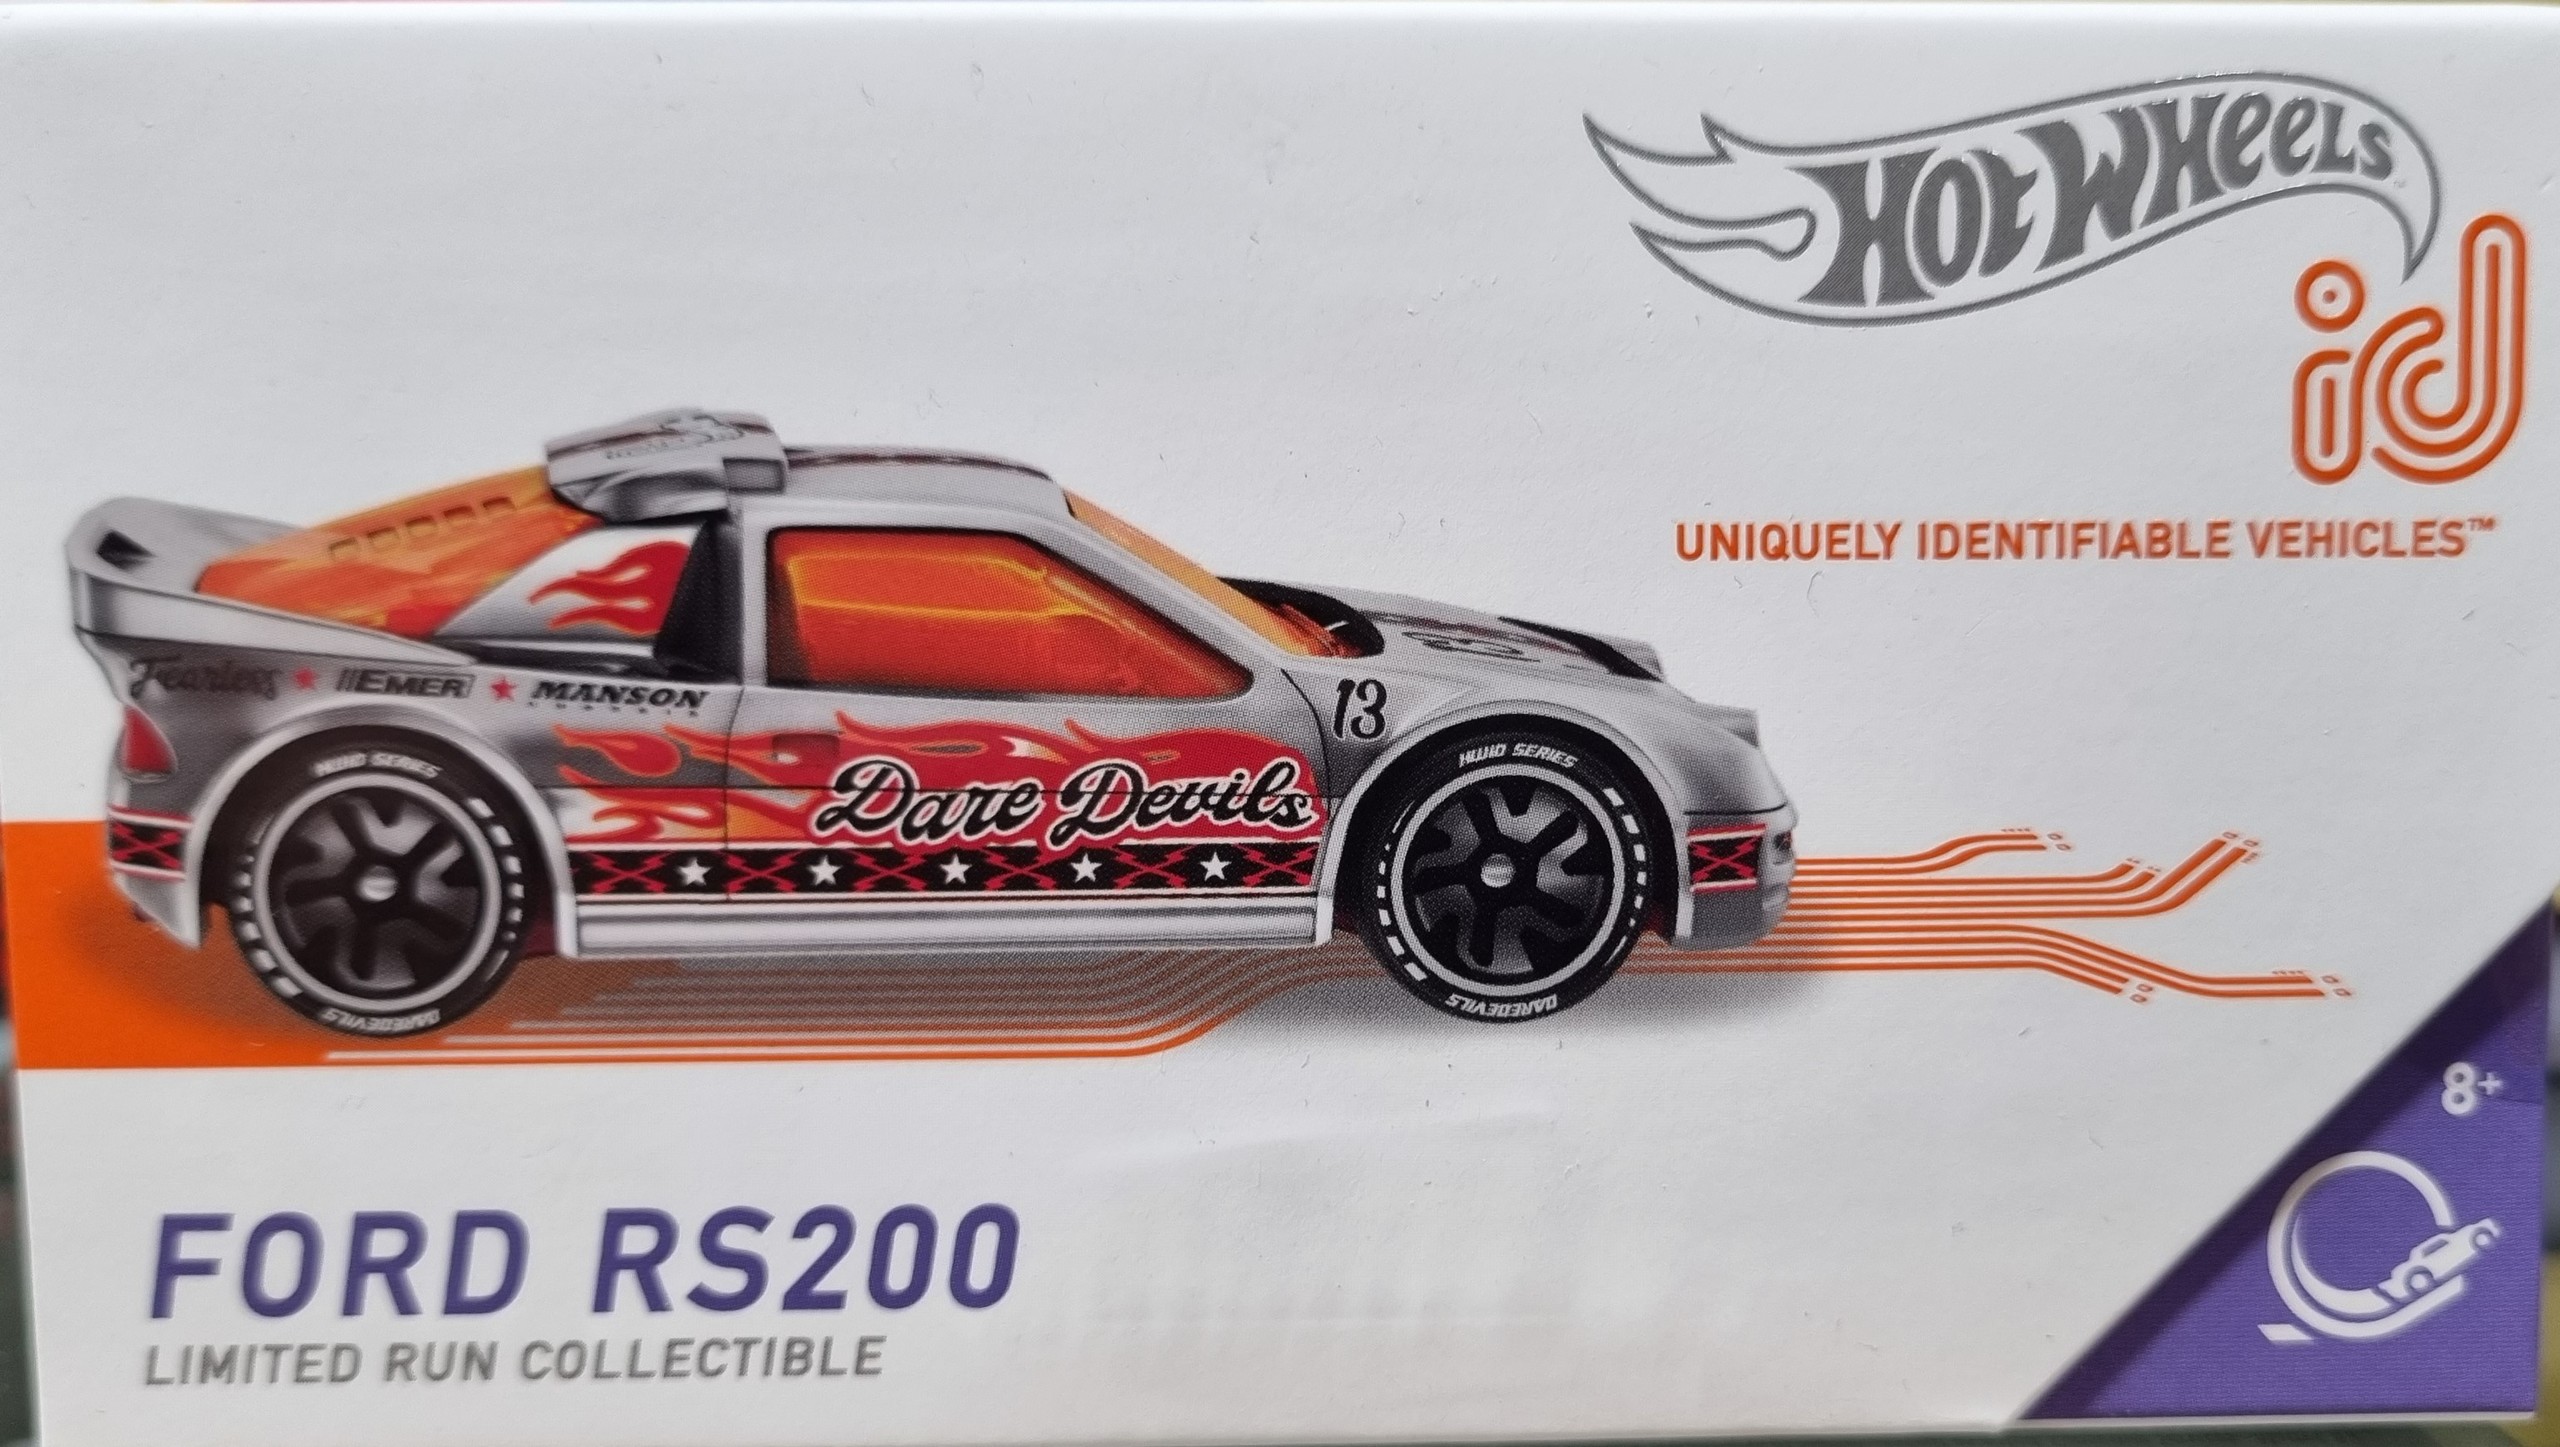 Hot Wheels id Cars Daredevils Ford RS200